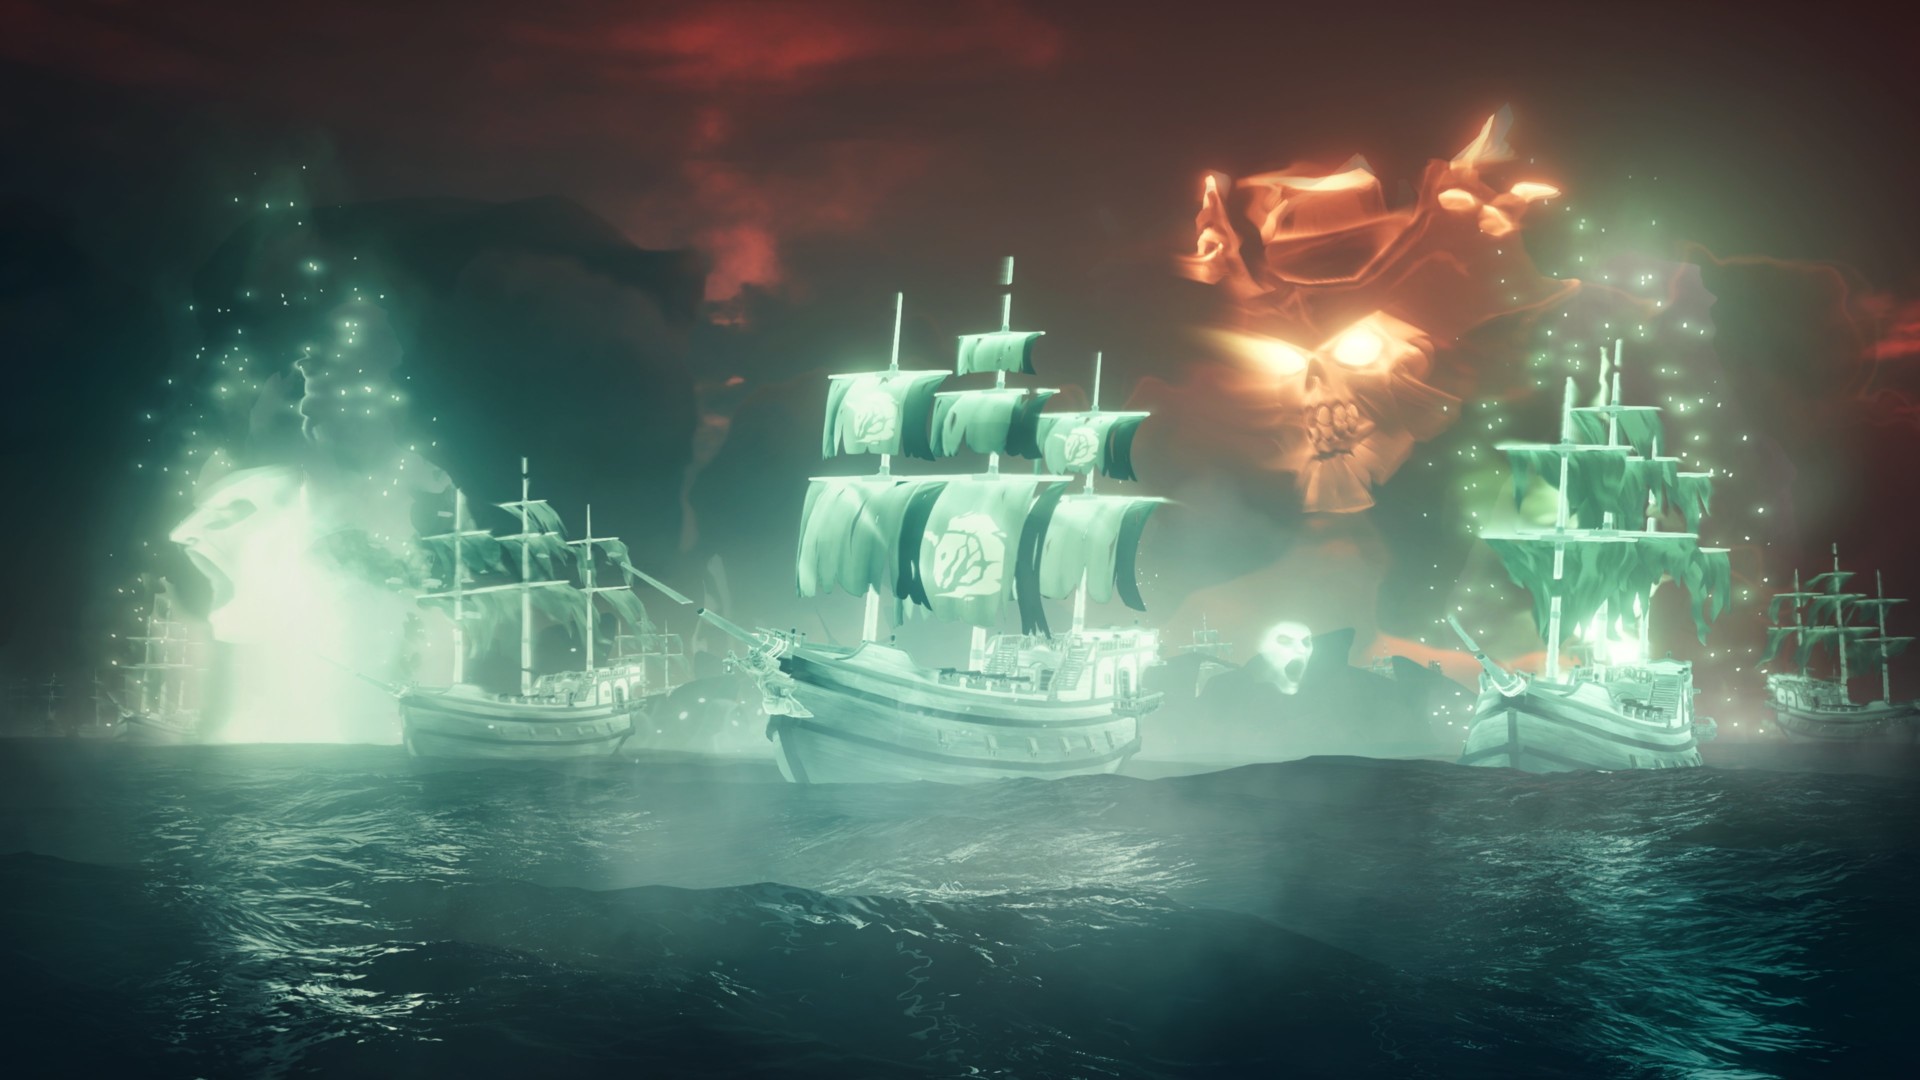 Sea of Thieves: Haunted Shores update has ghost ships prowling the seas